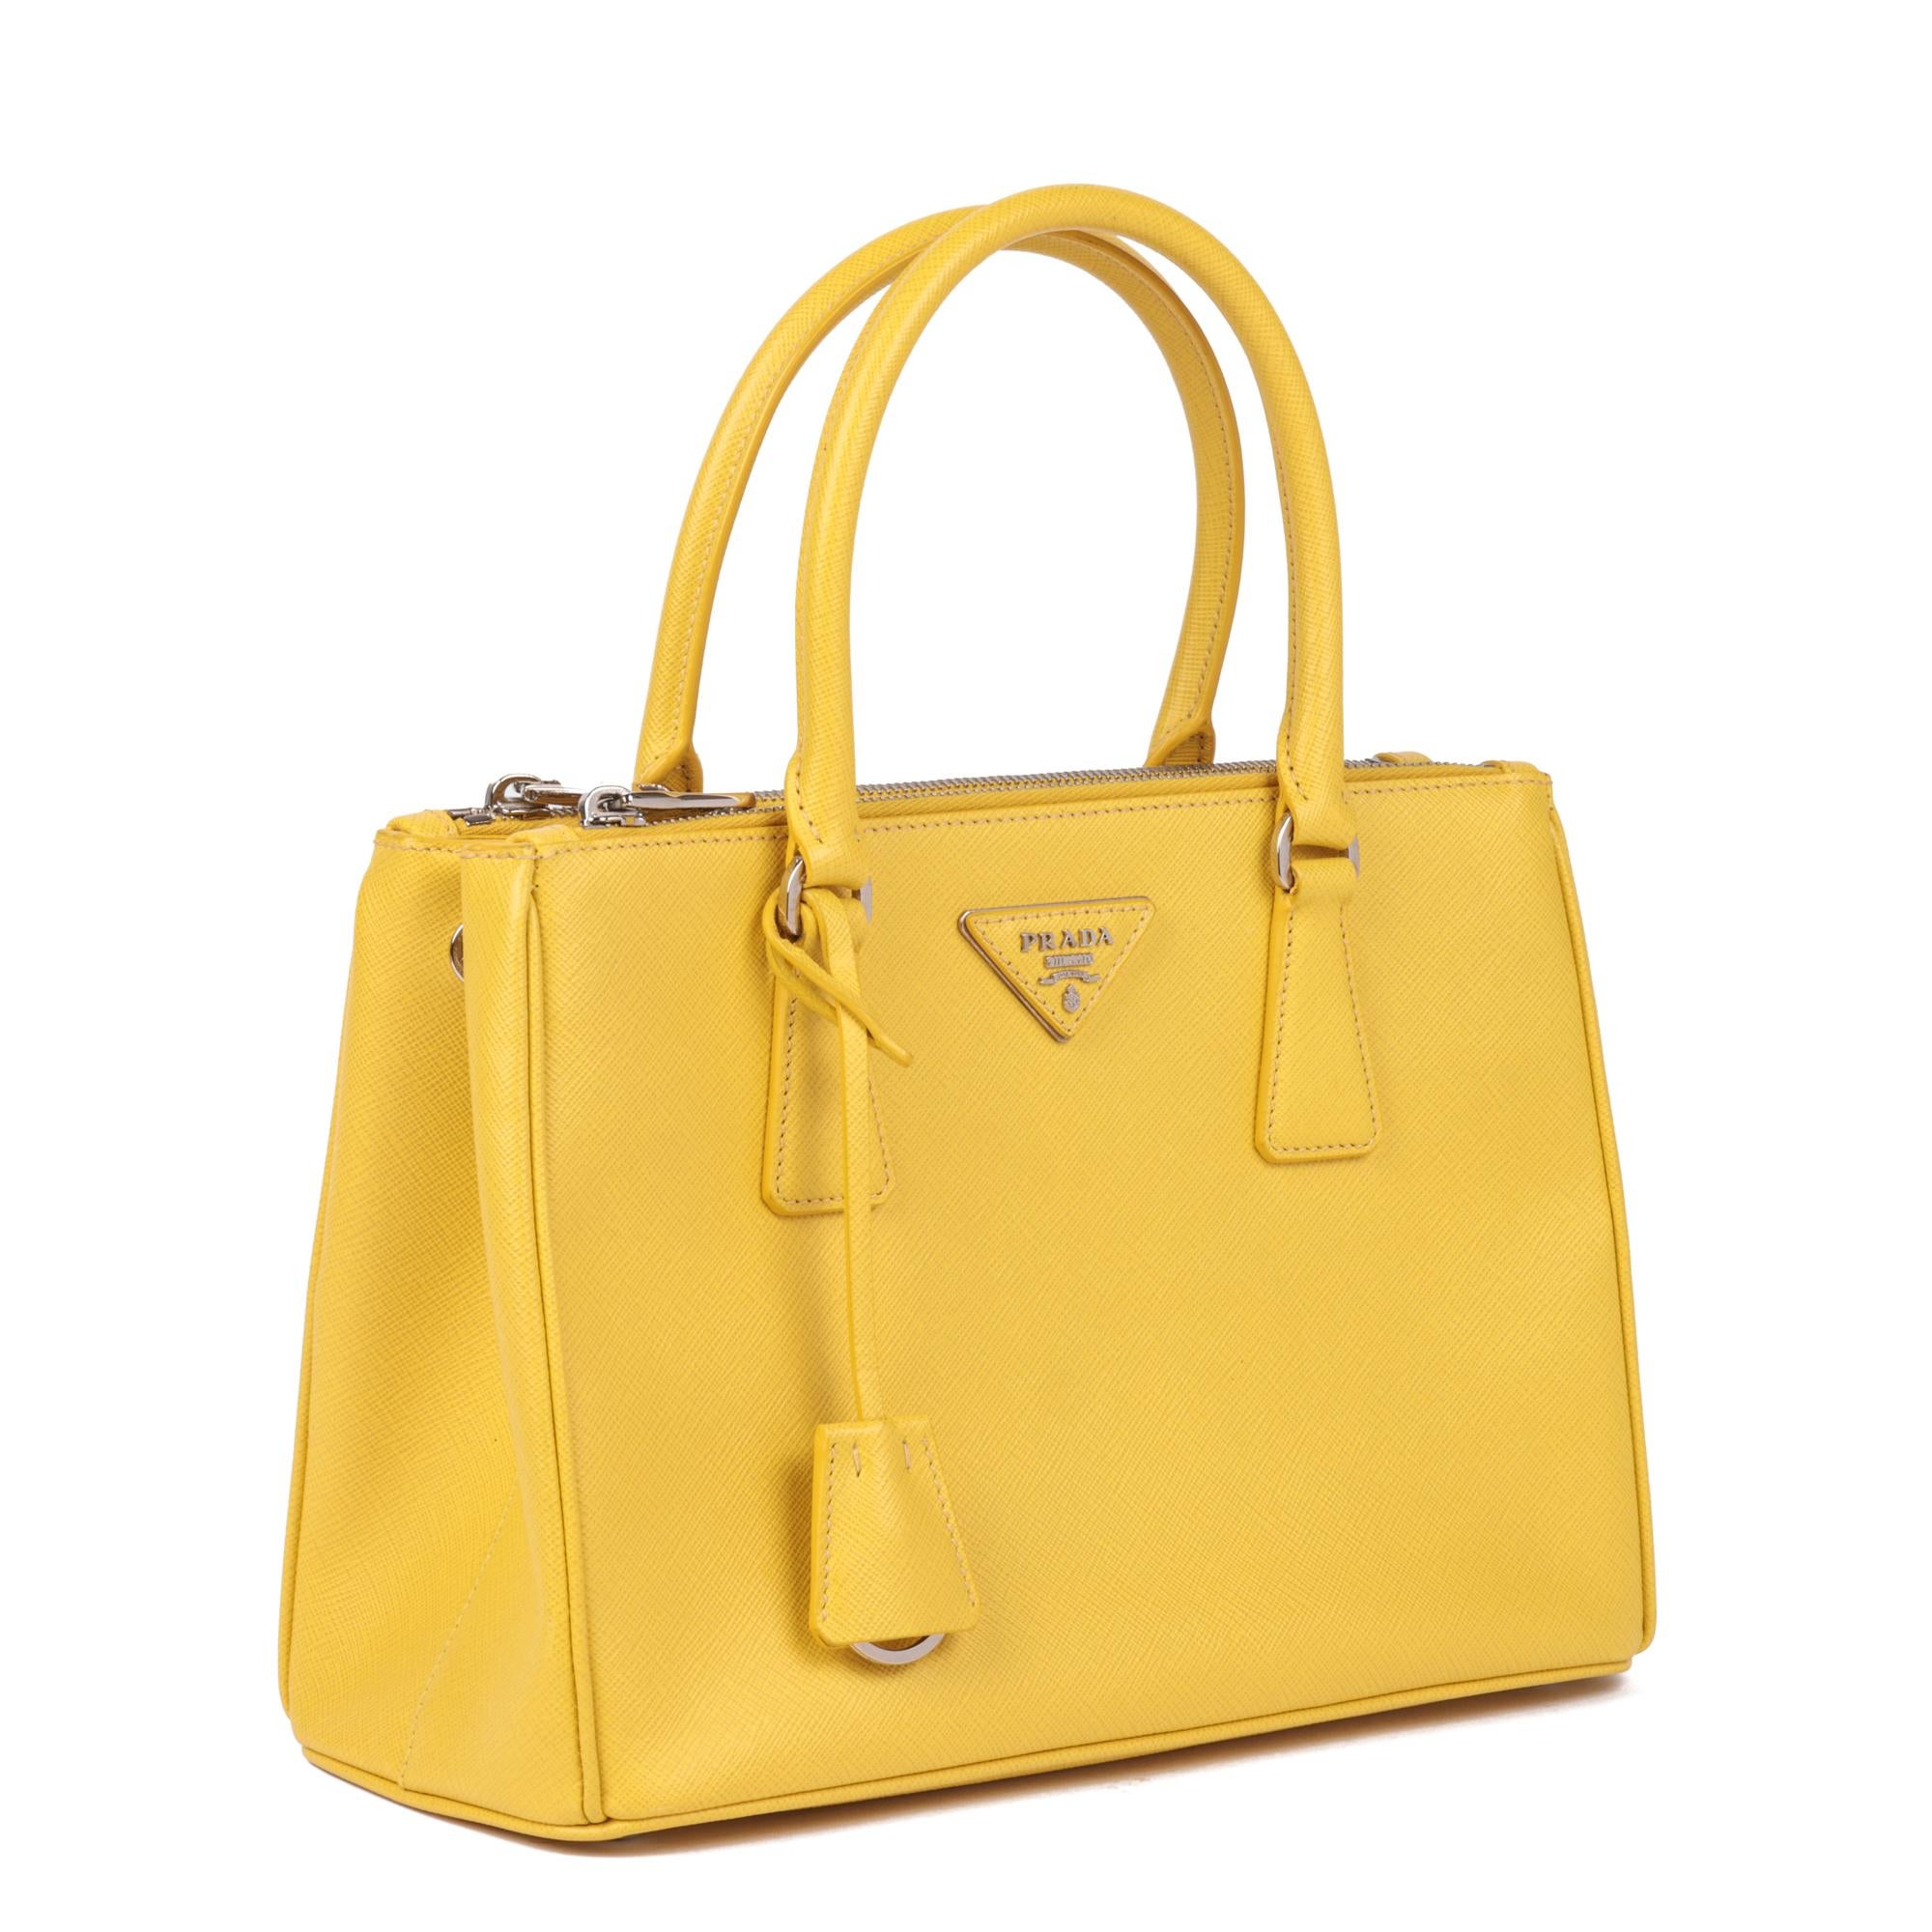 PRADA
Yellow Saffiano Leather Galleria Tote

Xupes Reference: CB844
Serial Number: 7/A
Age (Circa): 2015
Accompanied By: Authenticity Card, Care Card, Shoulder Strap, Dust bag for Strap, Clochette
Authenticity Details: Date Stamp (Made in